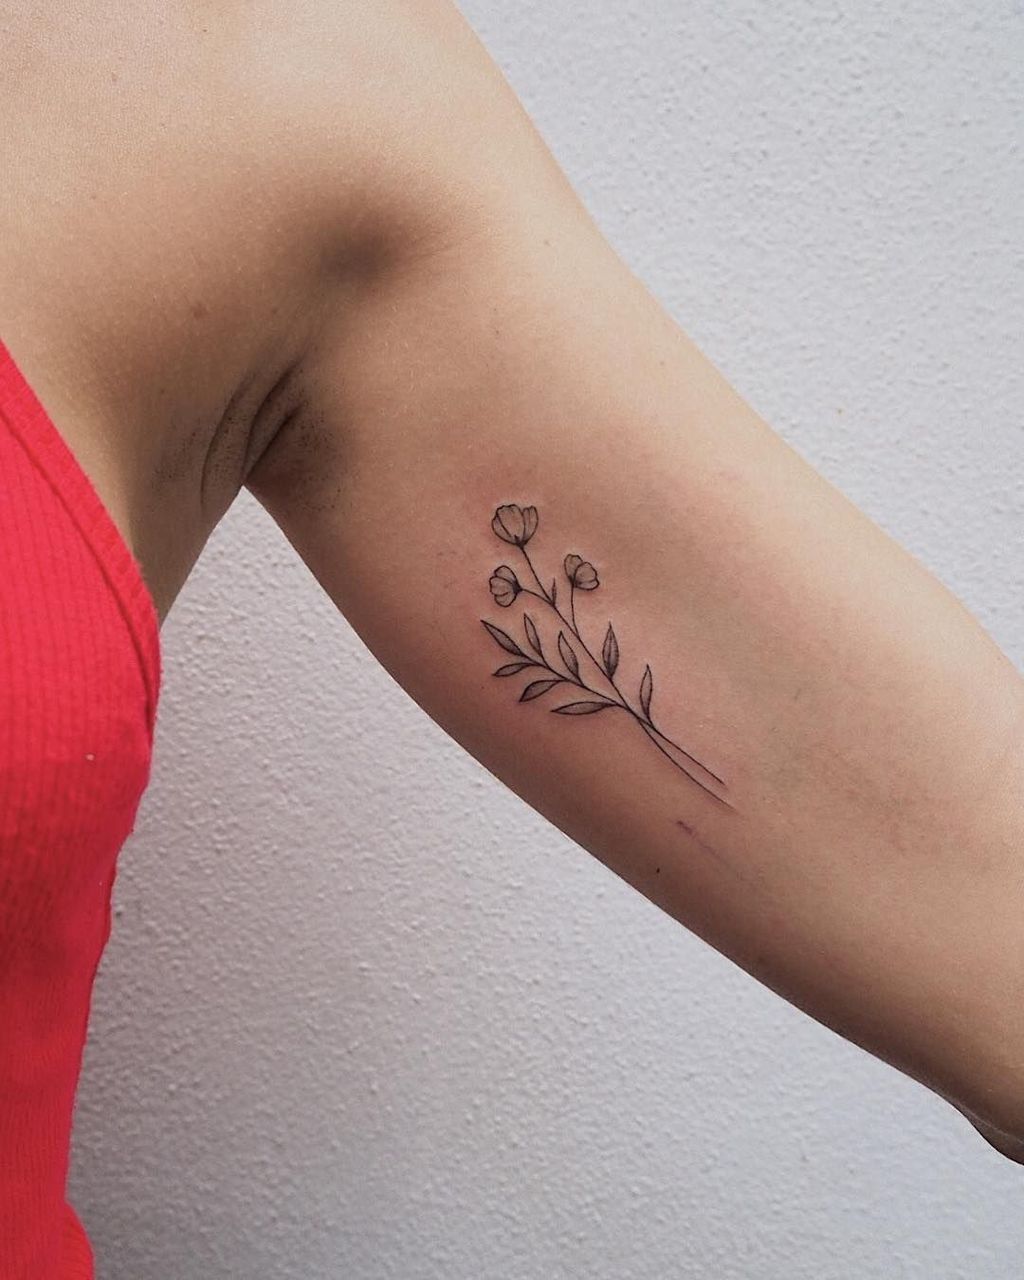 Small Simple Tattoos With Meaning (7)